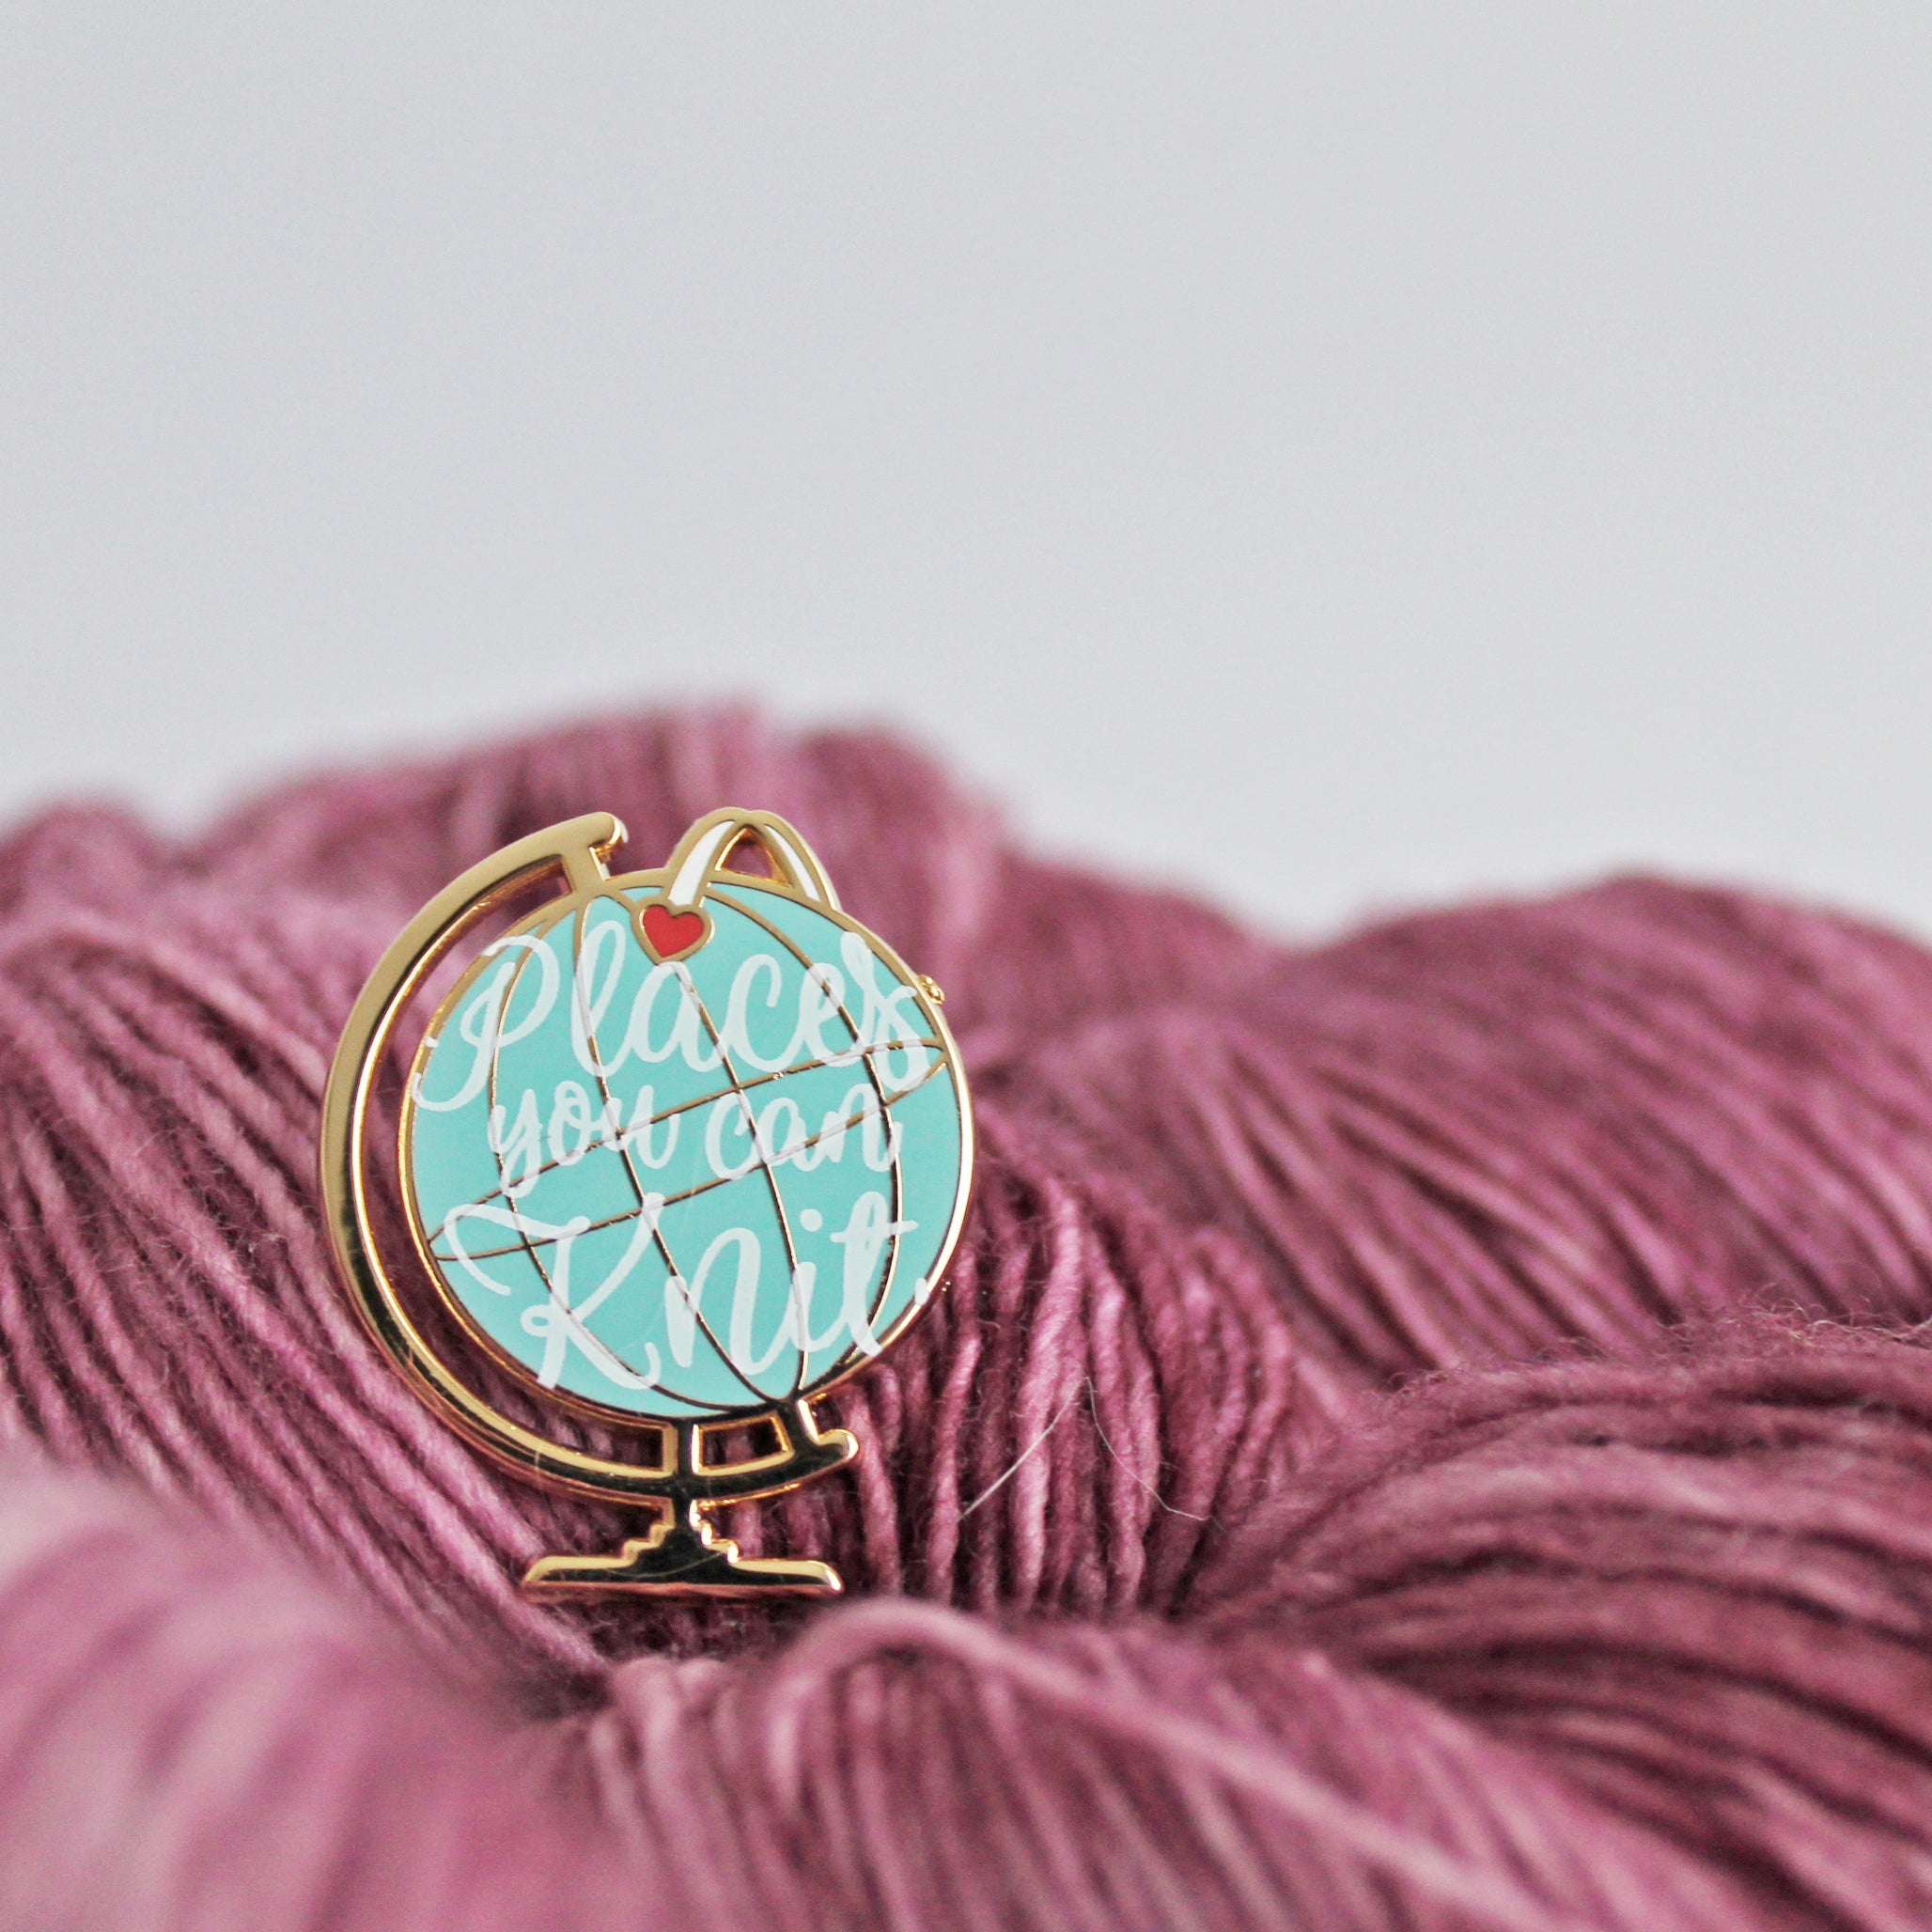 Places You Can Knit Enamel Pin